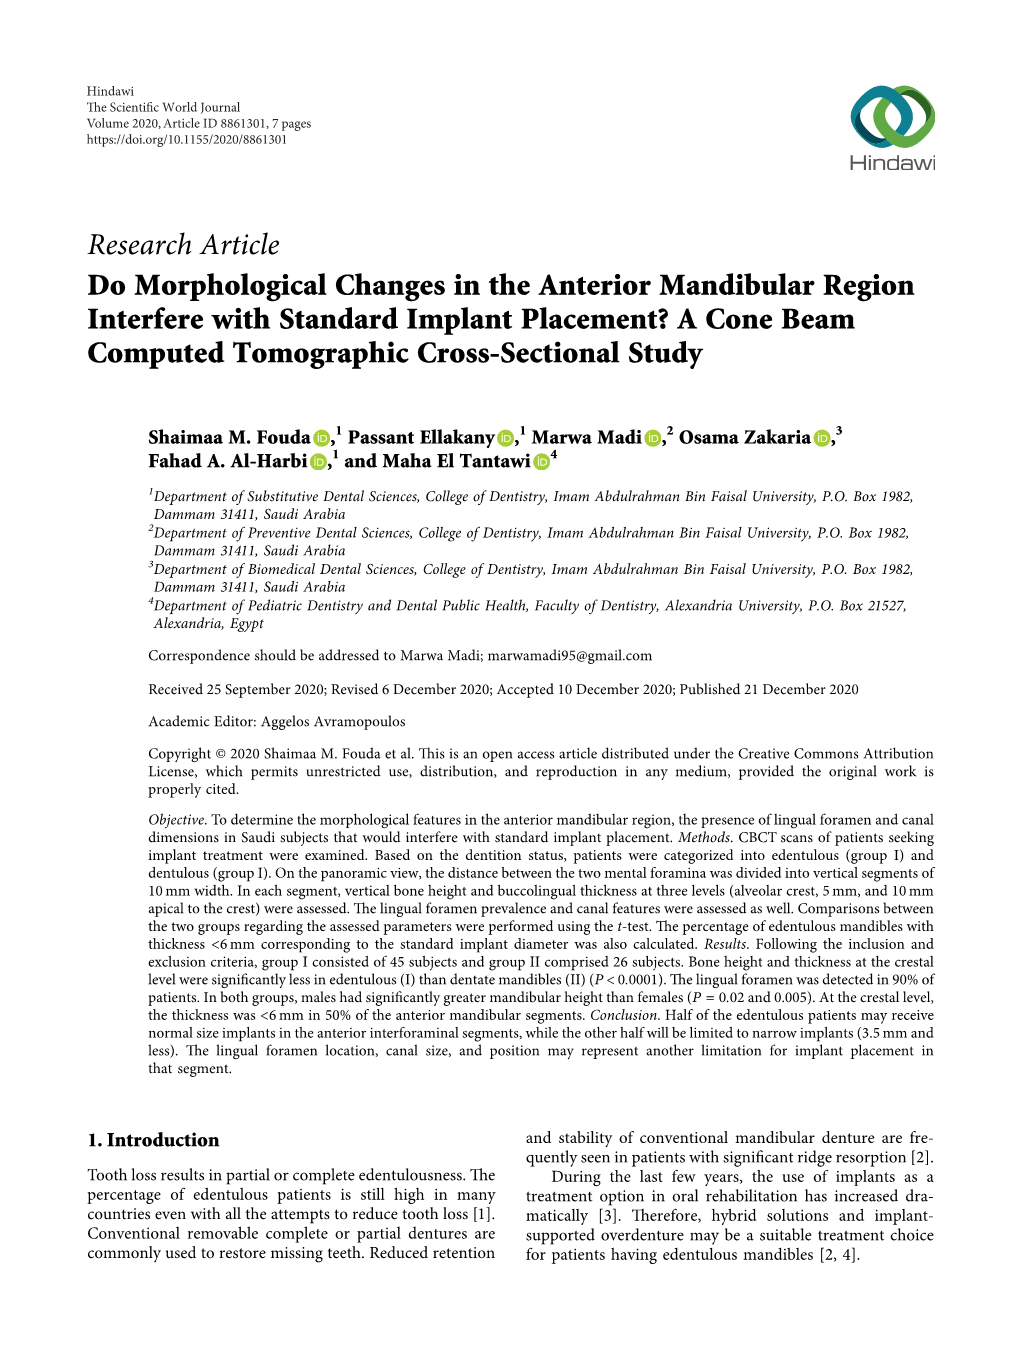 Do Morphological Changes in the Anterior Mandibular Region Interfere with Standard Implant Placement? a Cone Beam Computed Tomographic Cross-Sectional Study